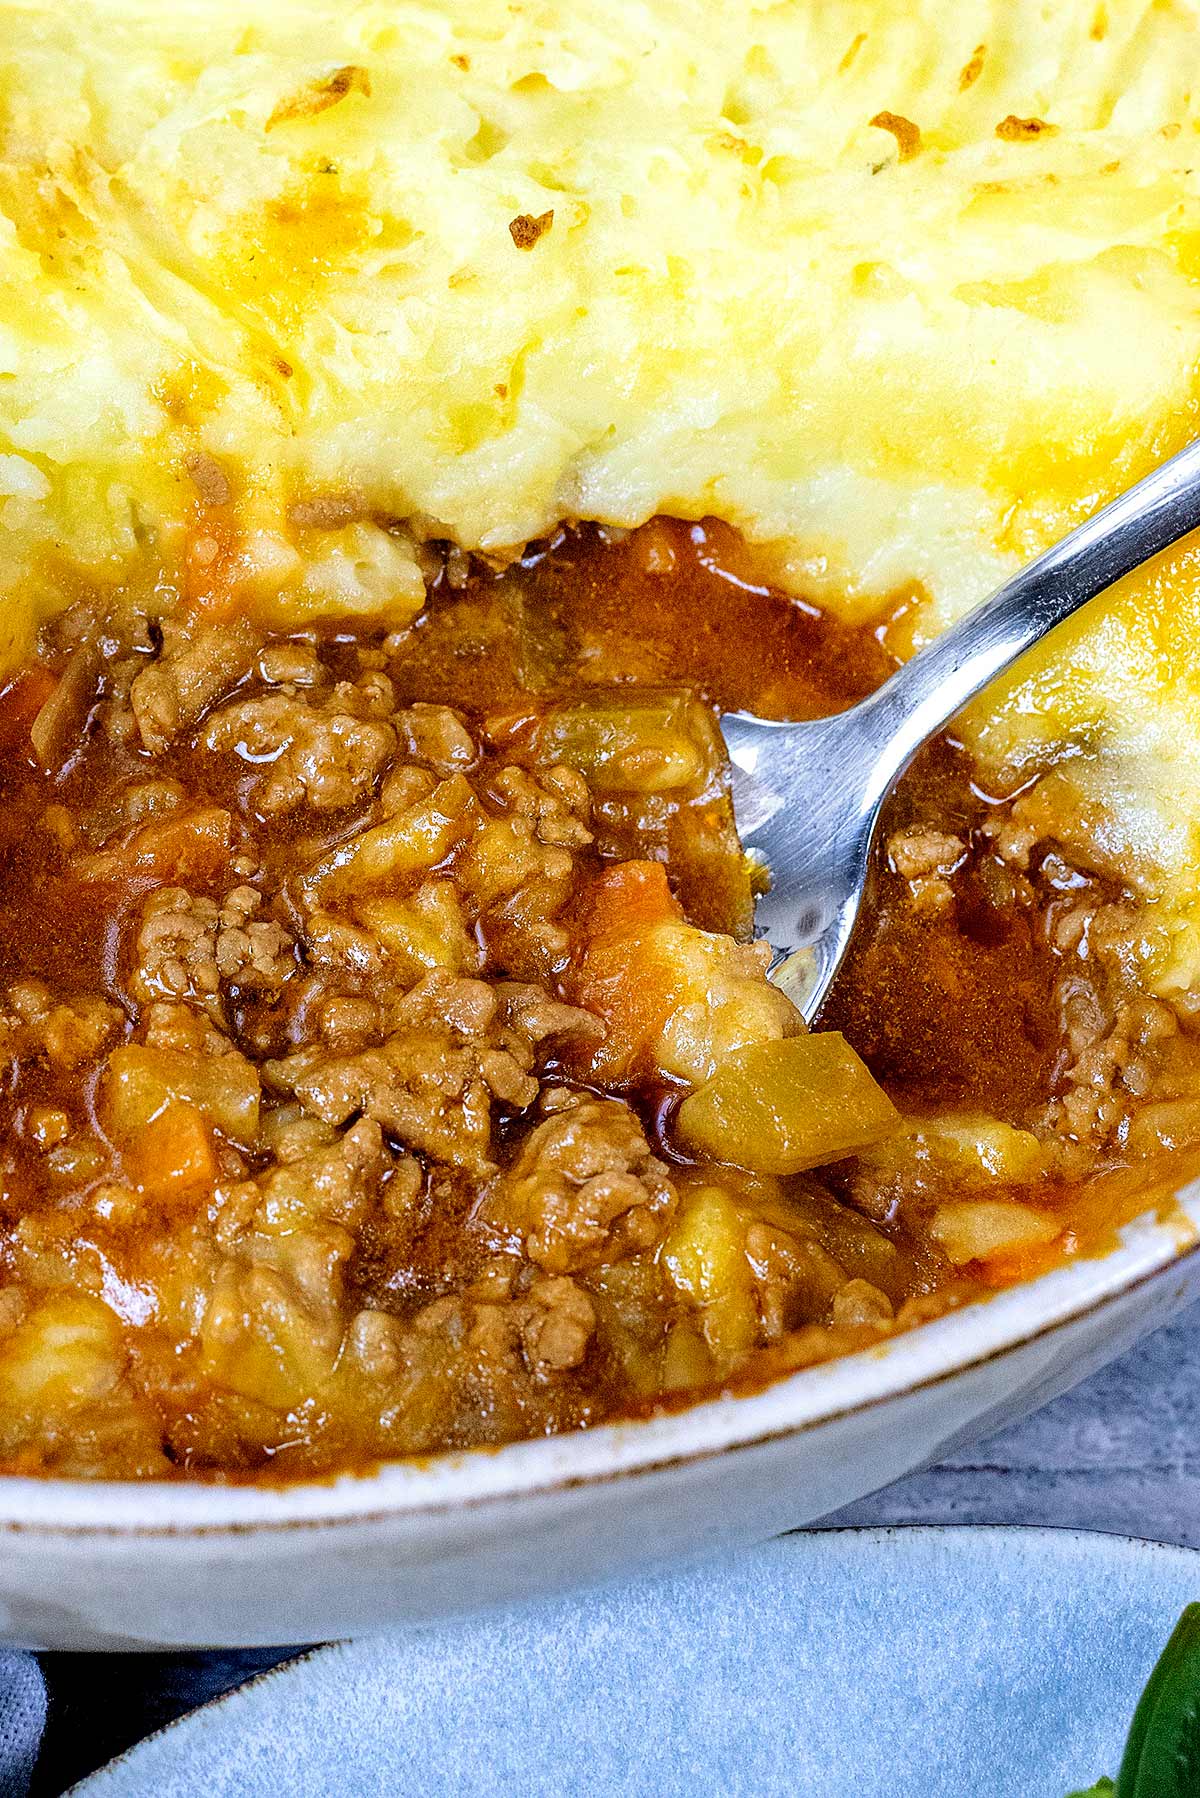 A spoon removing some mince from a large dish of shepherd's pie.